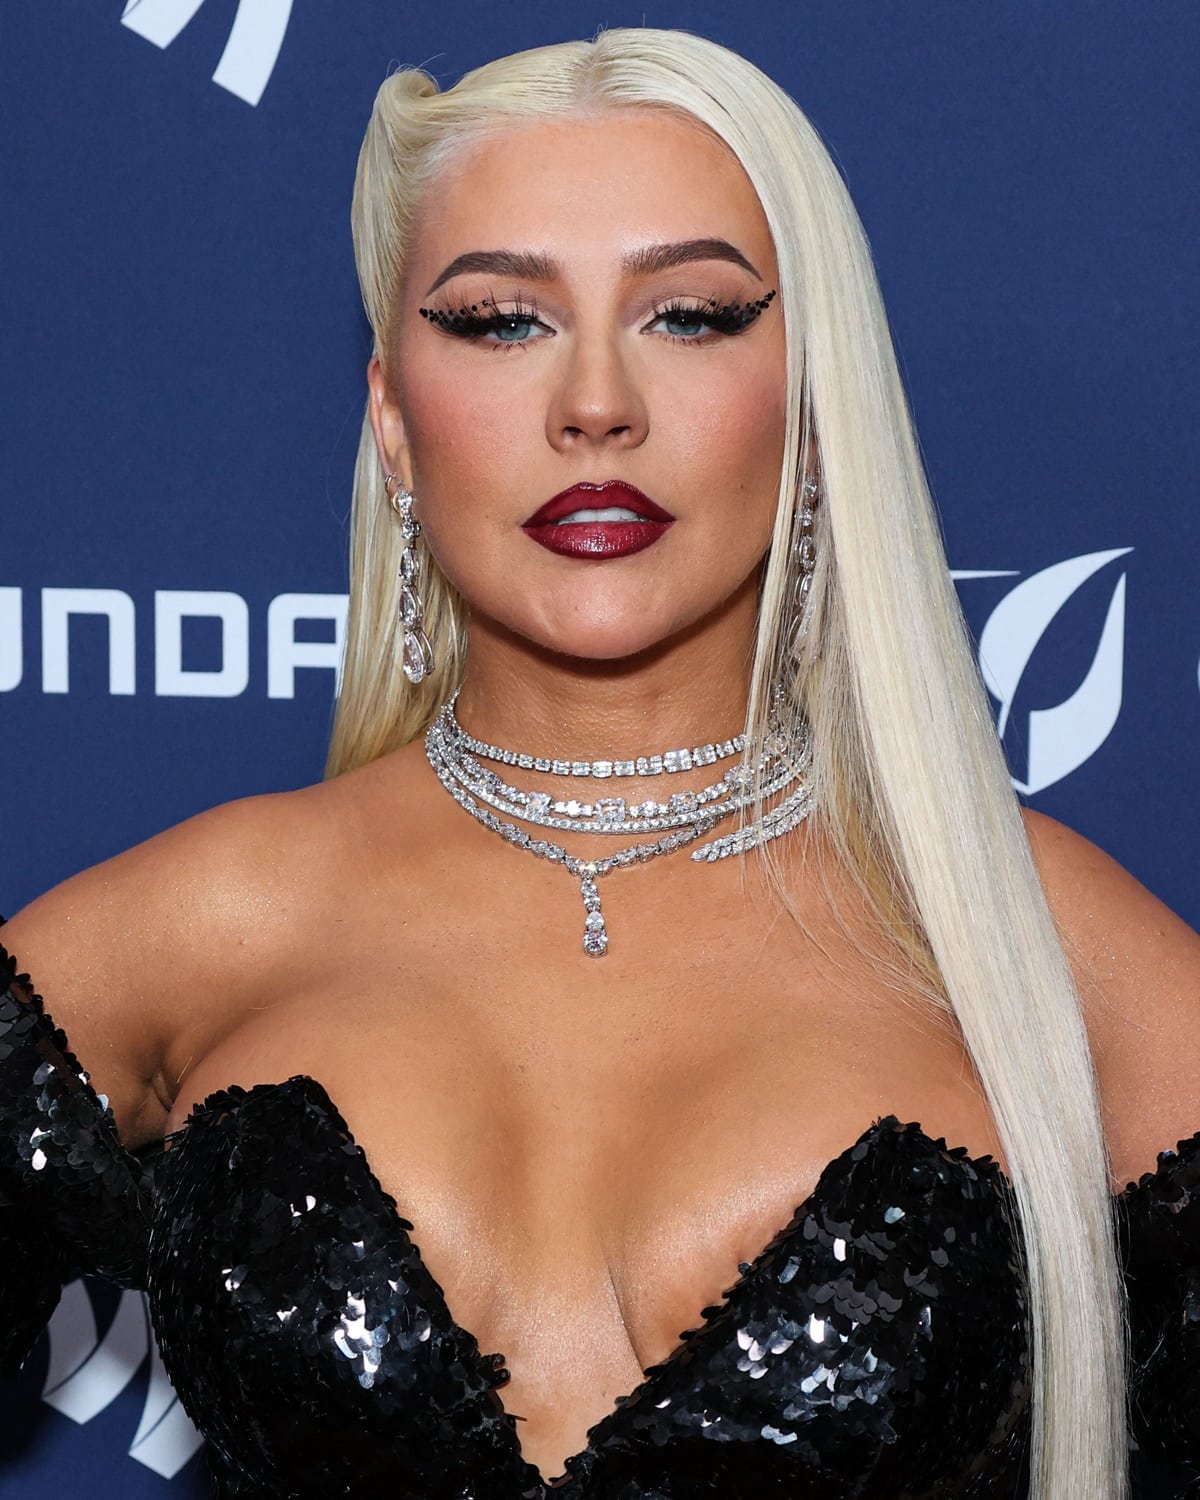 Christina Aguilera wore her hair down, with the right side elegantly pinned back to showcase her sparkling chandelier earrings and layers of choker necklaces